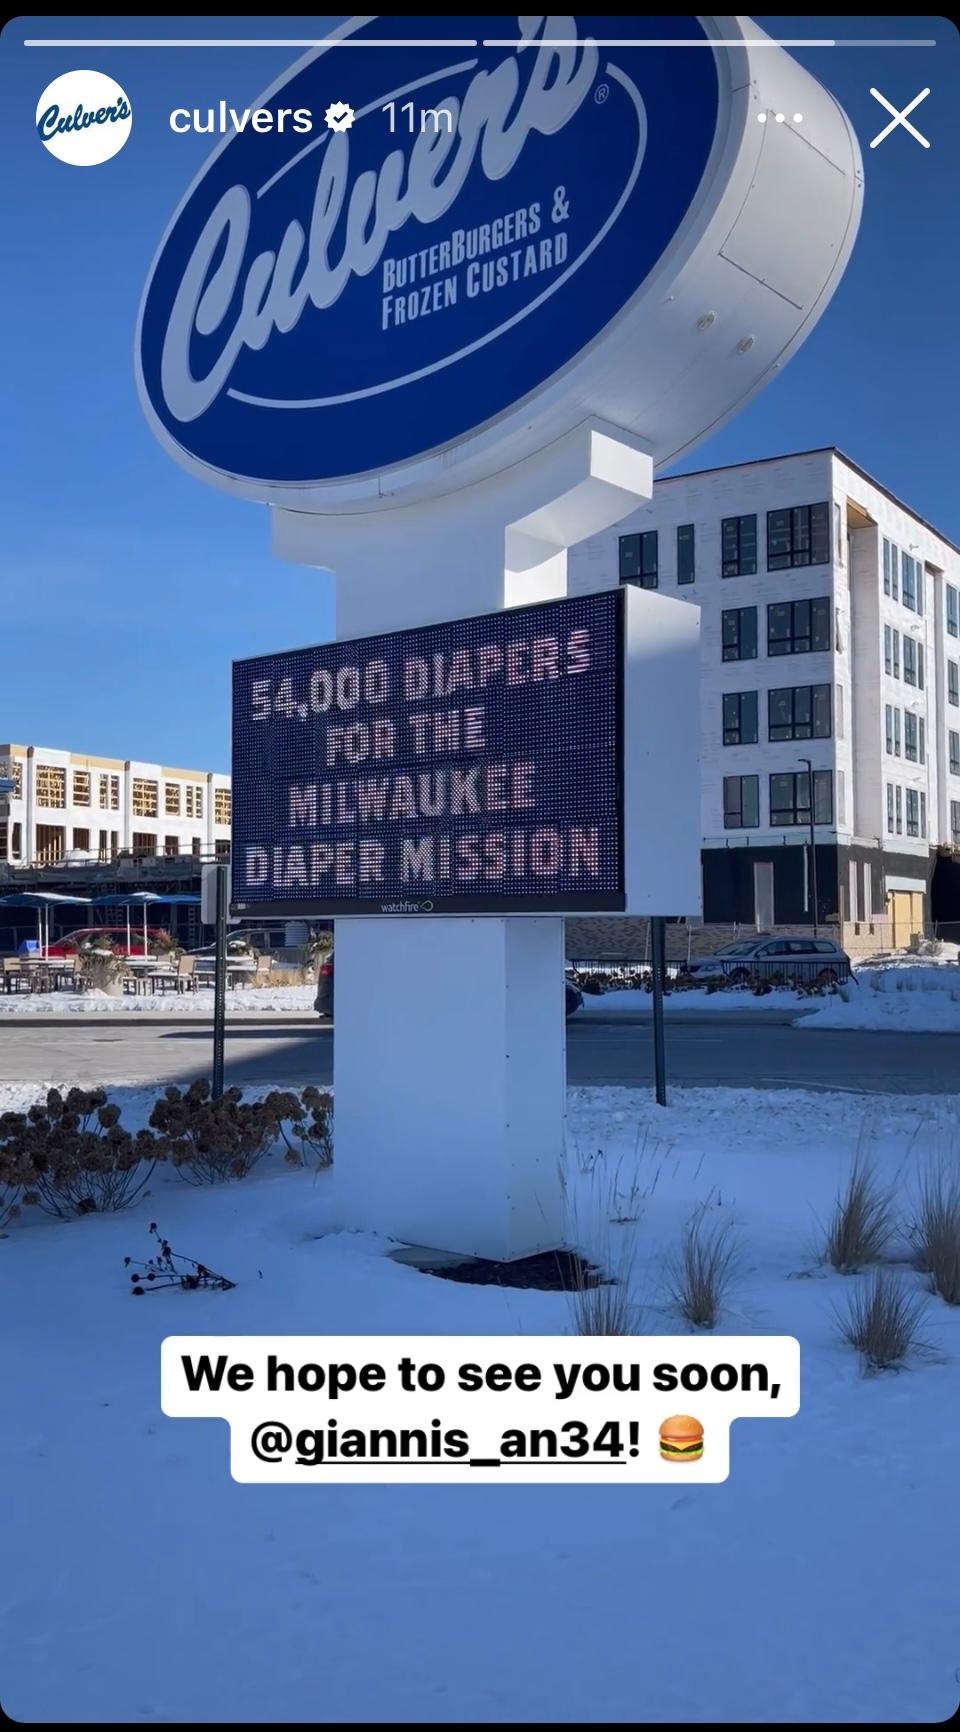 Culver's response to Giannis